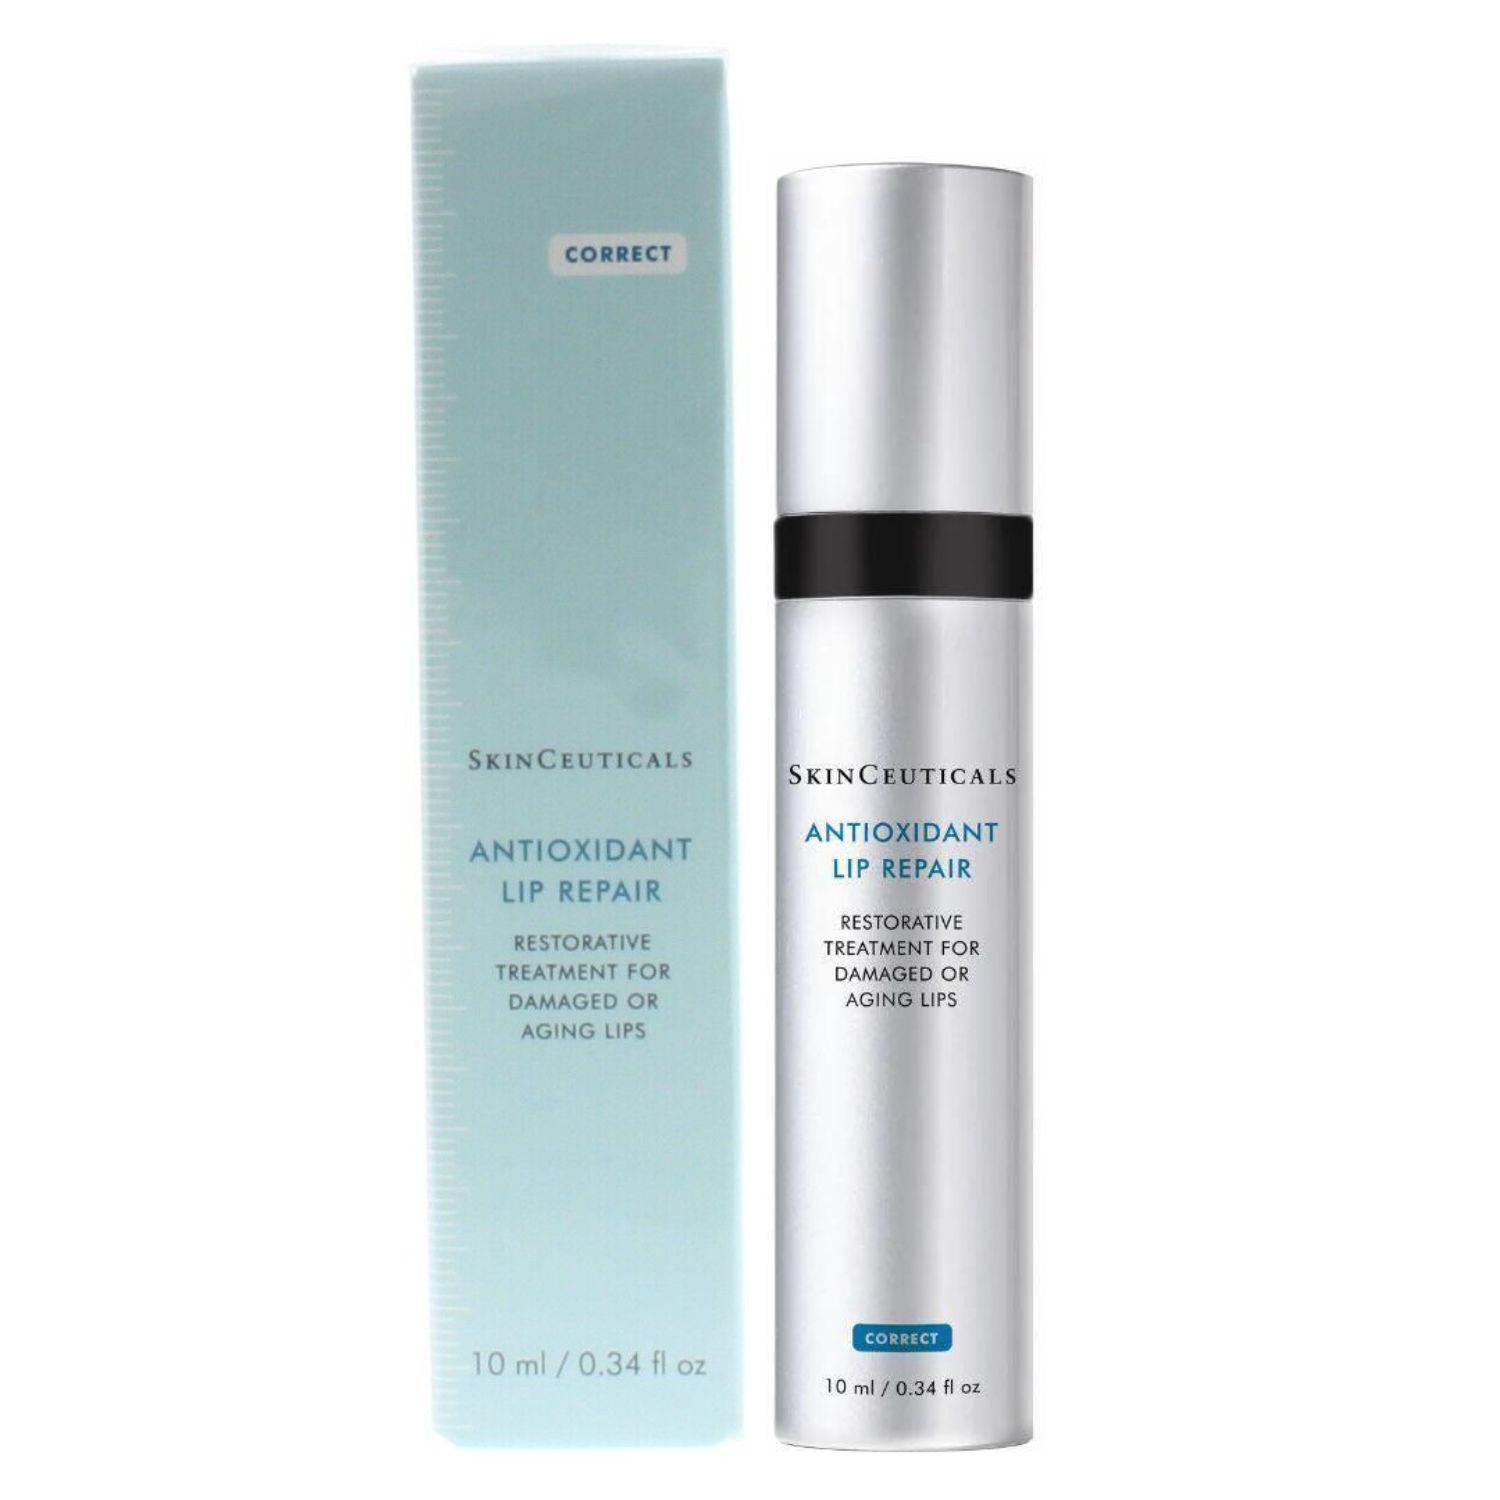 SkinCeuticals Antioxidant Lip Repair for Damaged or Aging Lips 0.34 oz - image 1 of 5